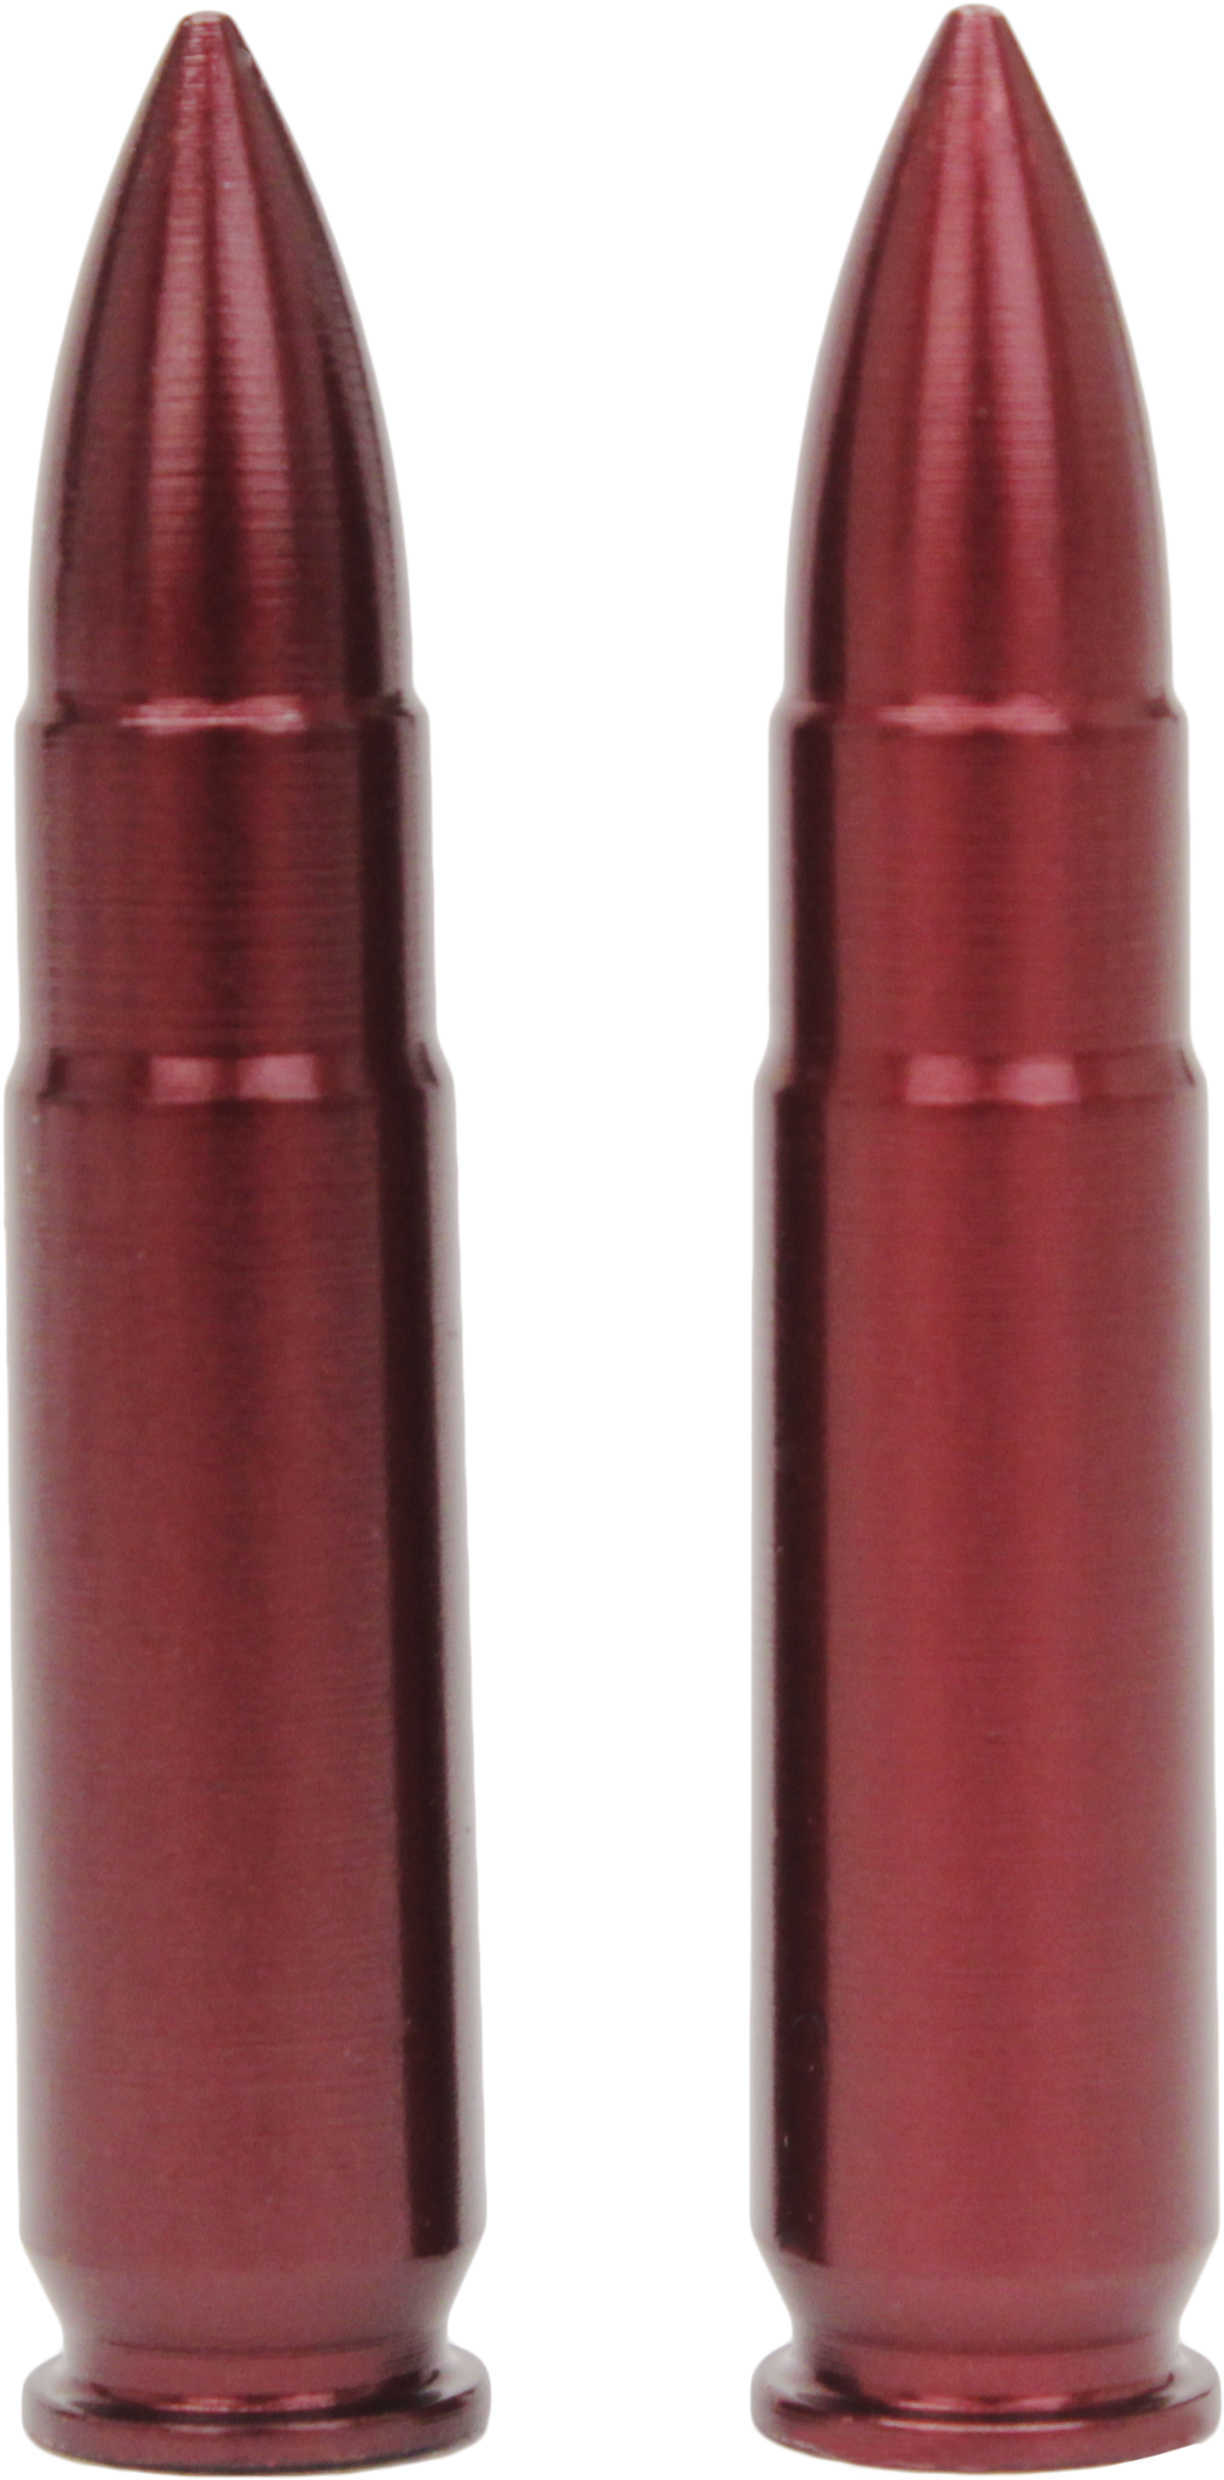 A-Zoom Snap Caps 300-AAC Blackout 2/Pack 12271